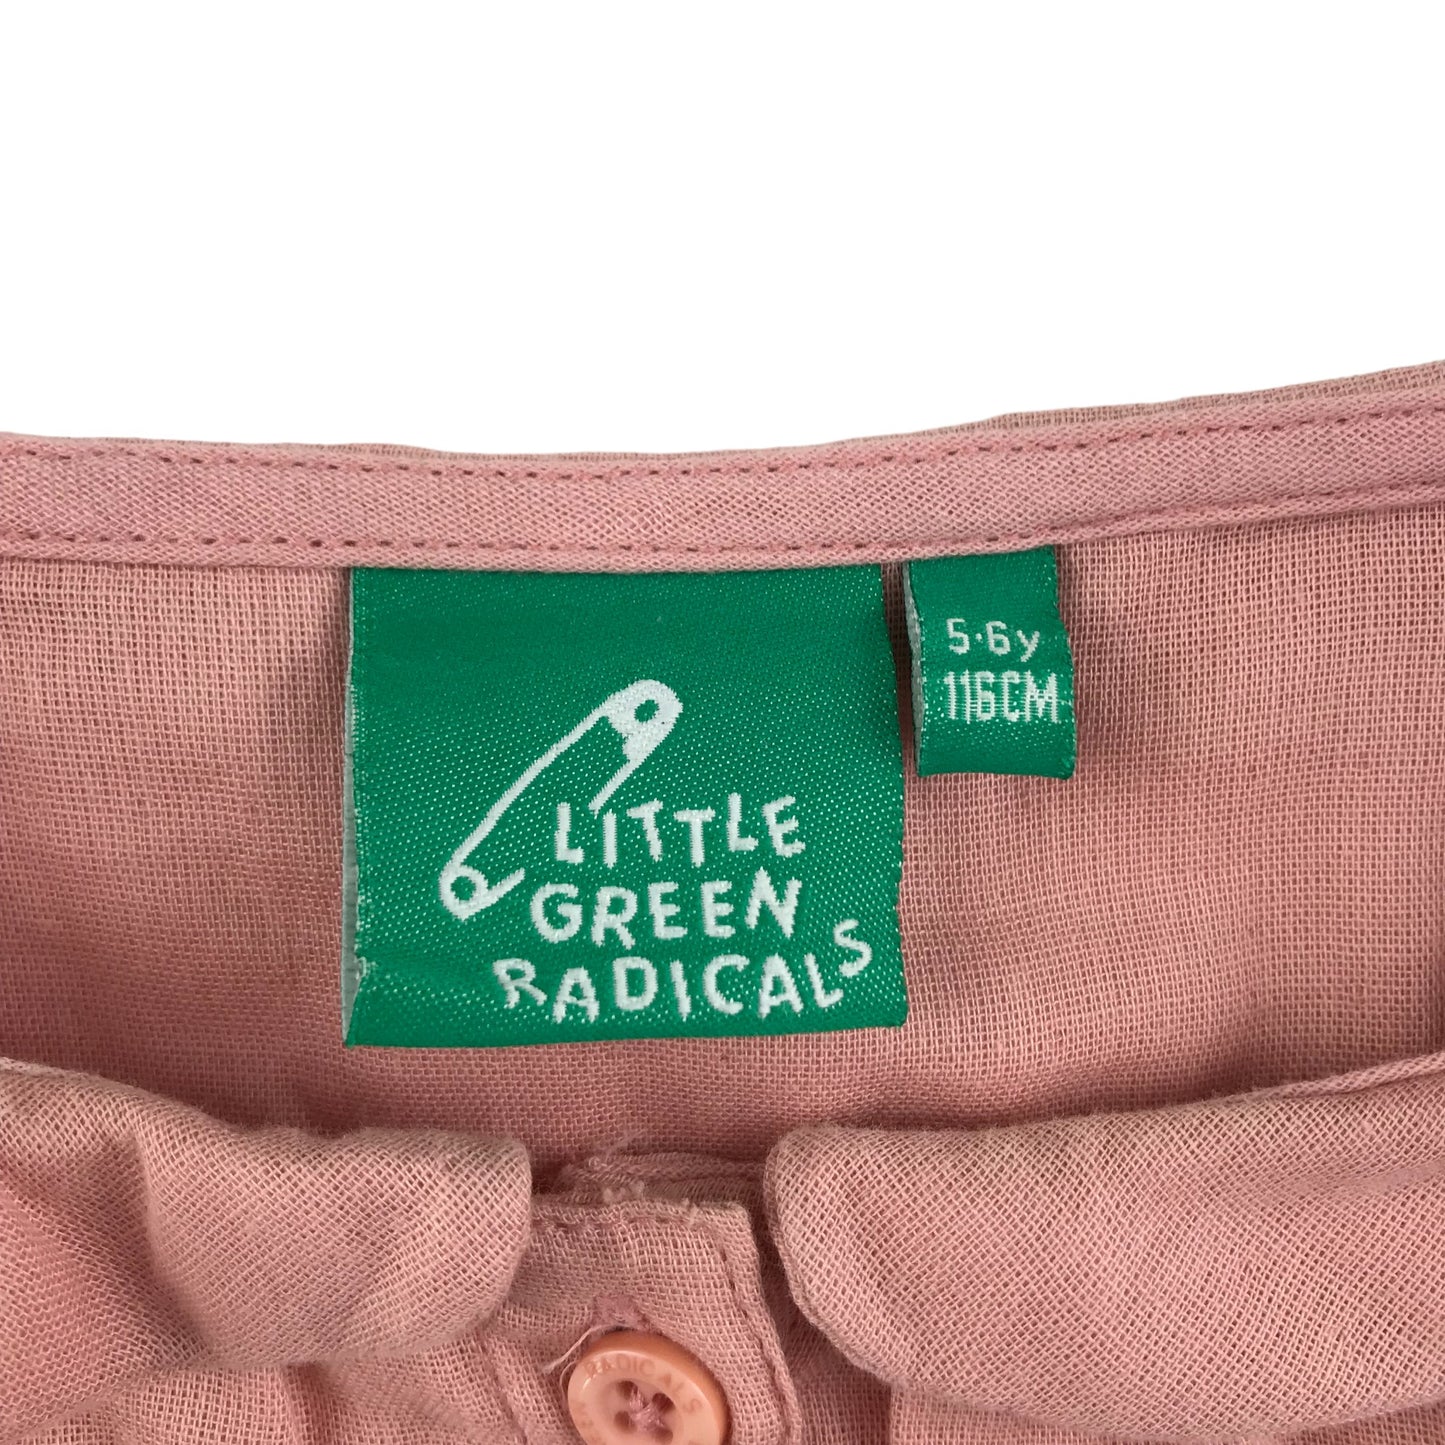 Little Green Radicals Blouse Age 5 Vintage Pink Short Sleeve Button Up Cotton